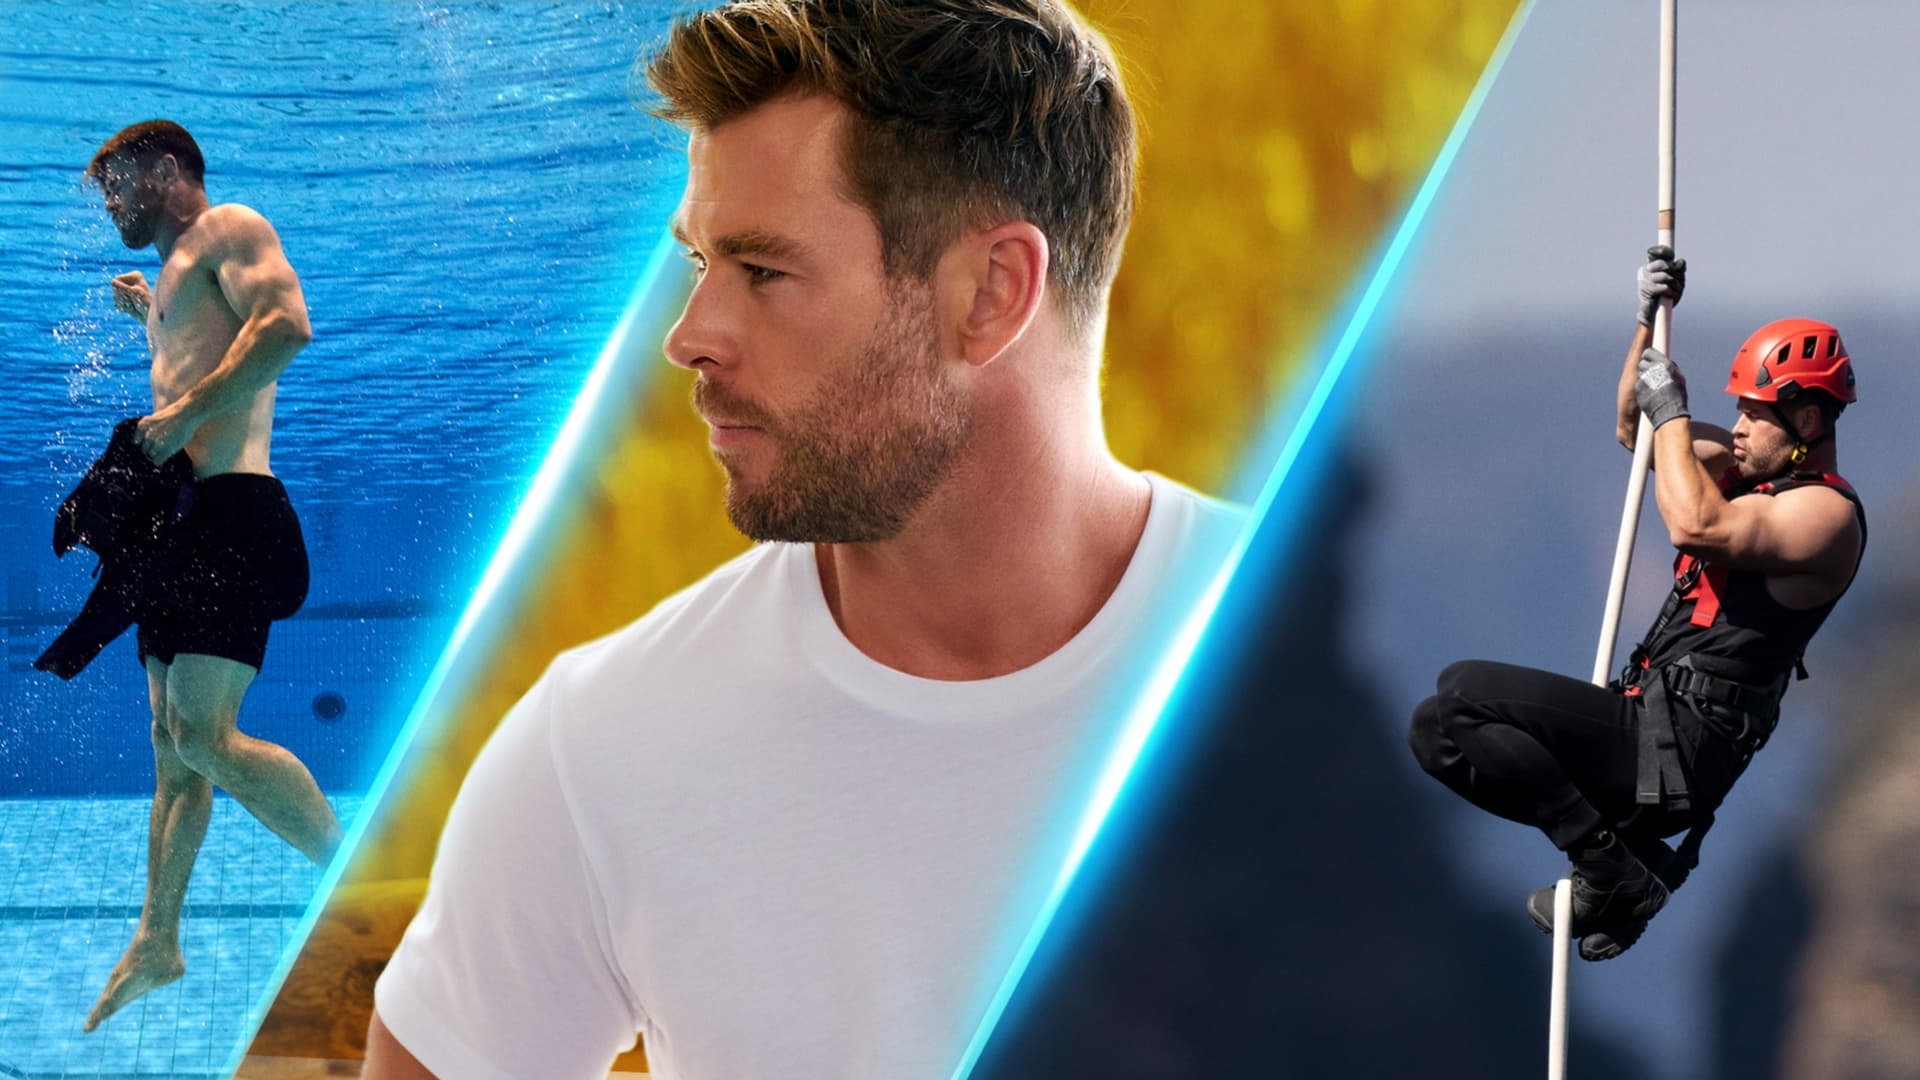 Show Limitless with Chris Hemsworth